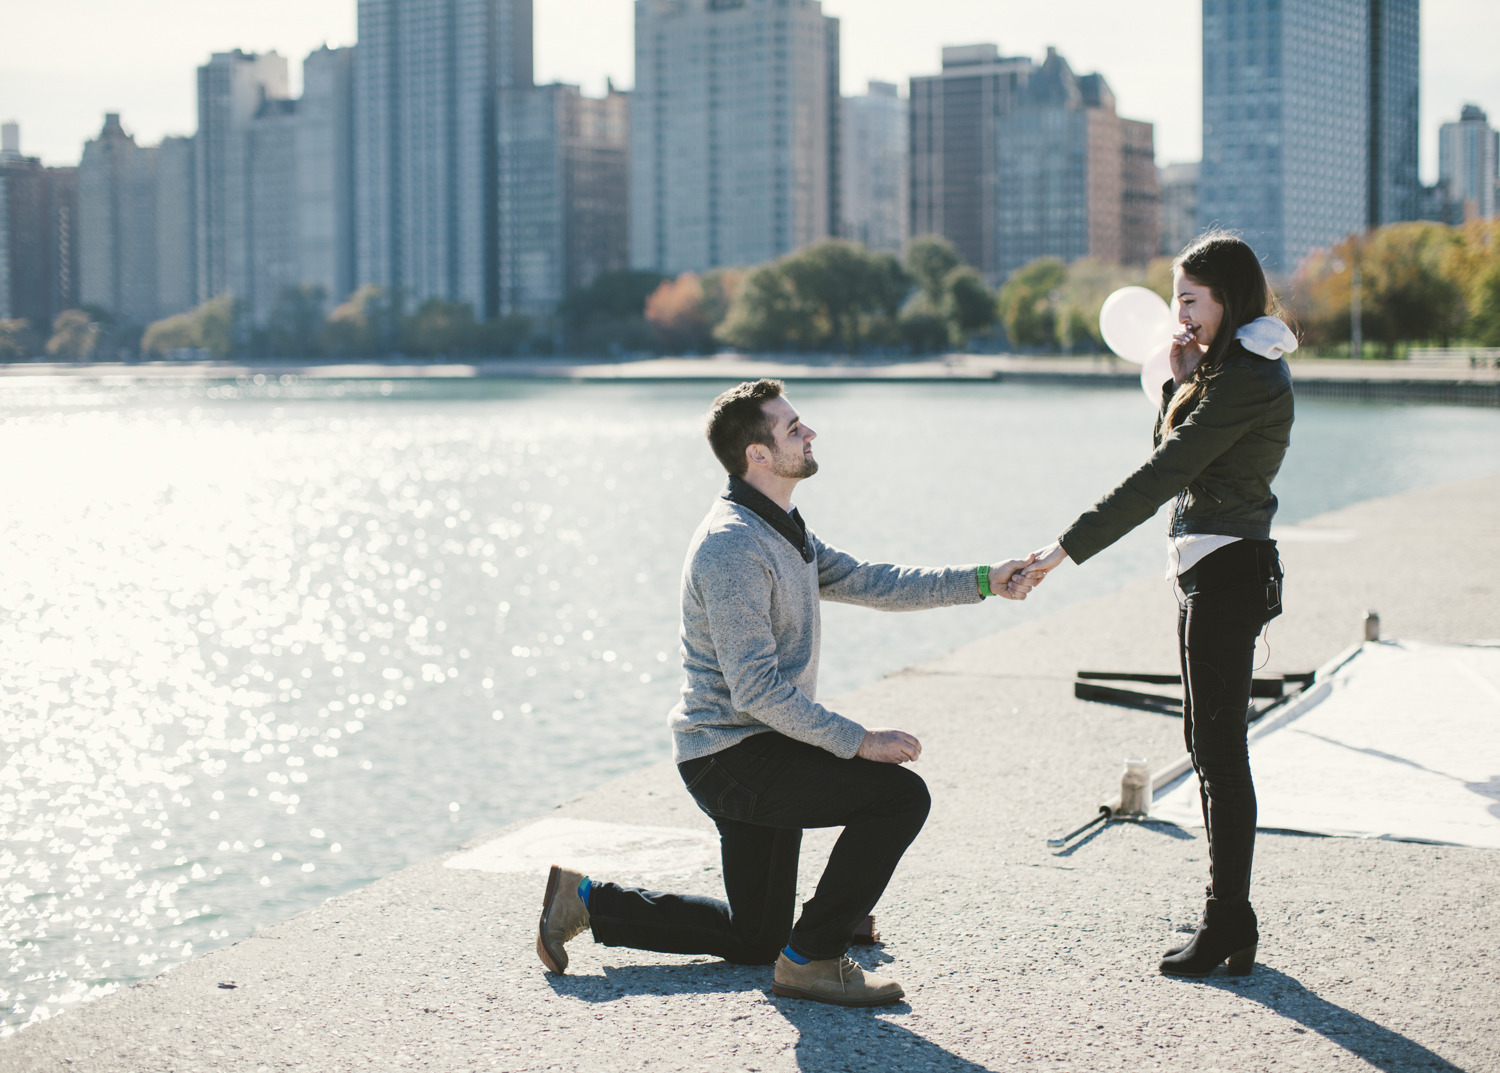 What Are The Top Tips To Planning The Perfect Proposal?